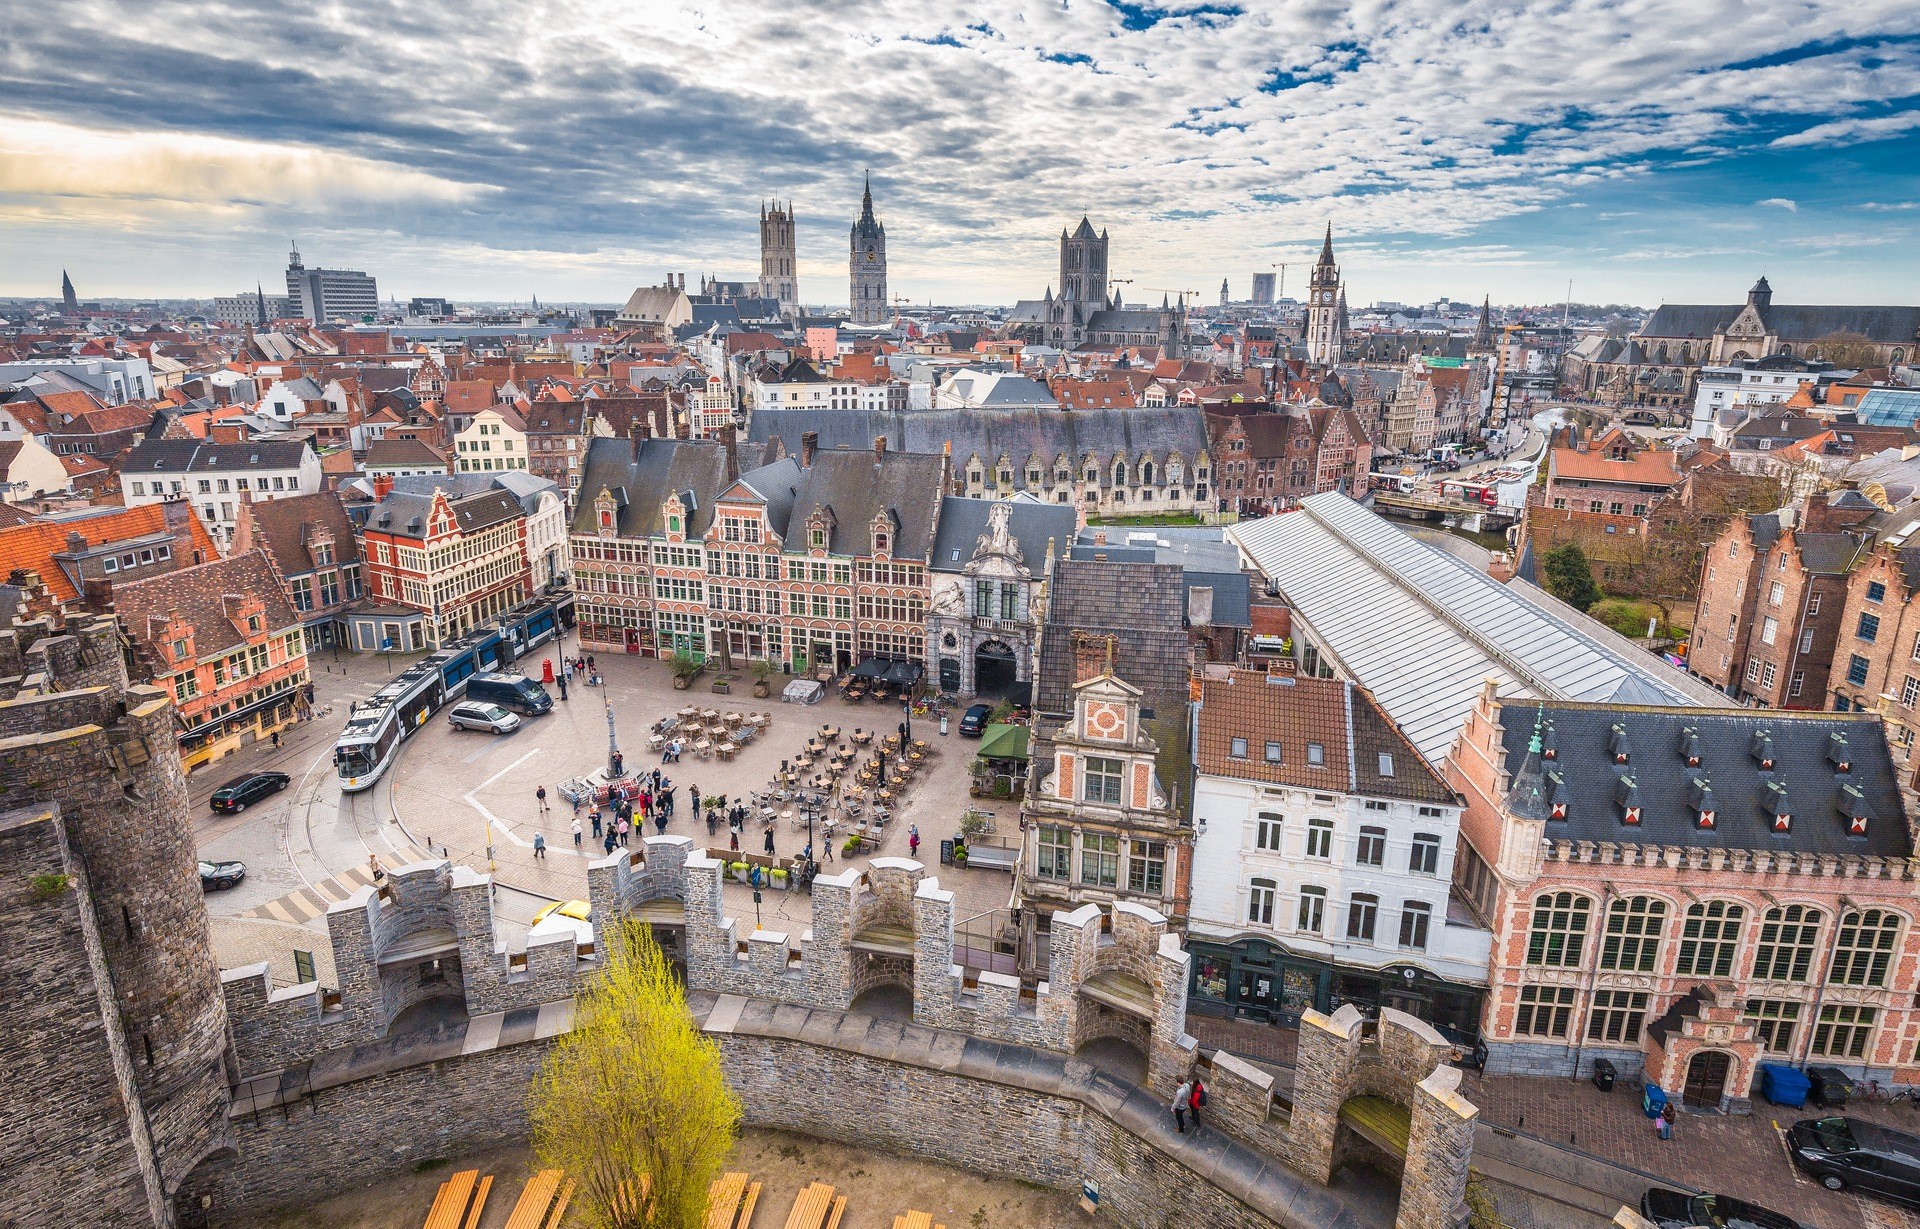 5 Ways to Experience Ghent, Belgium by Private Jet